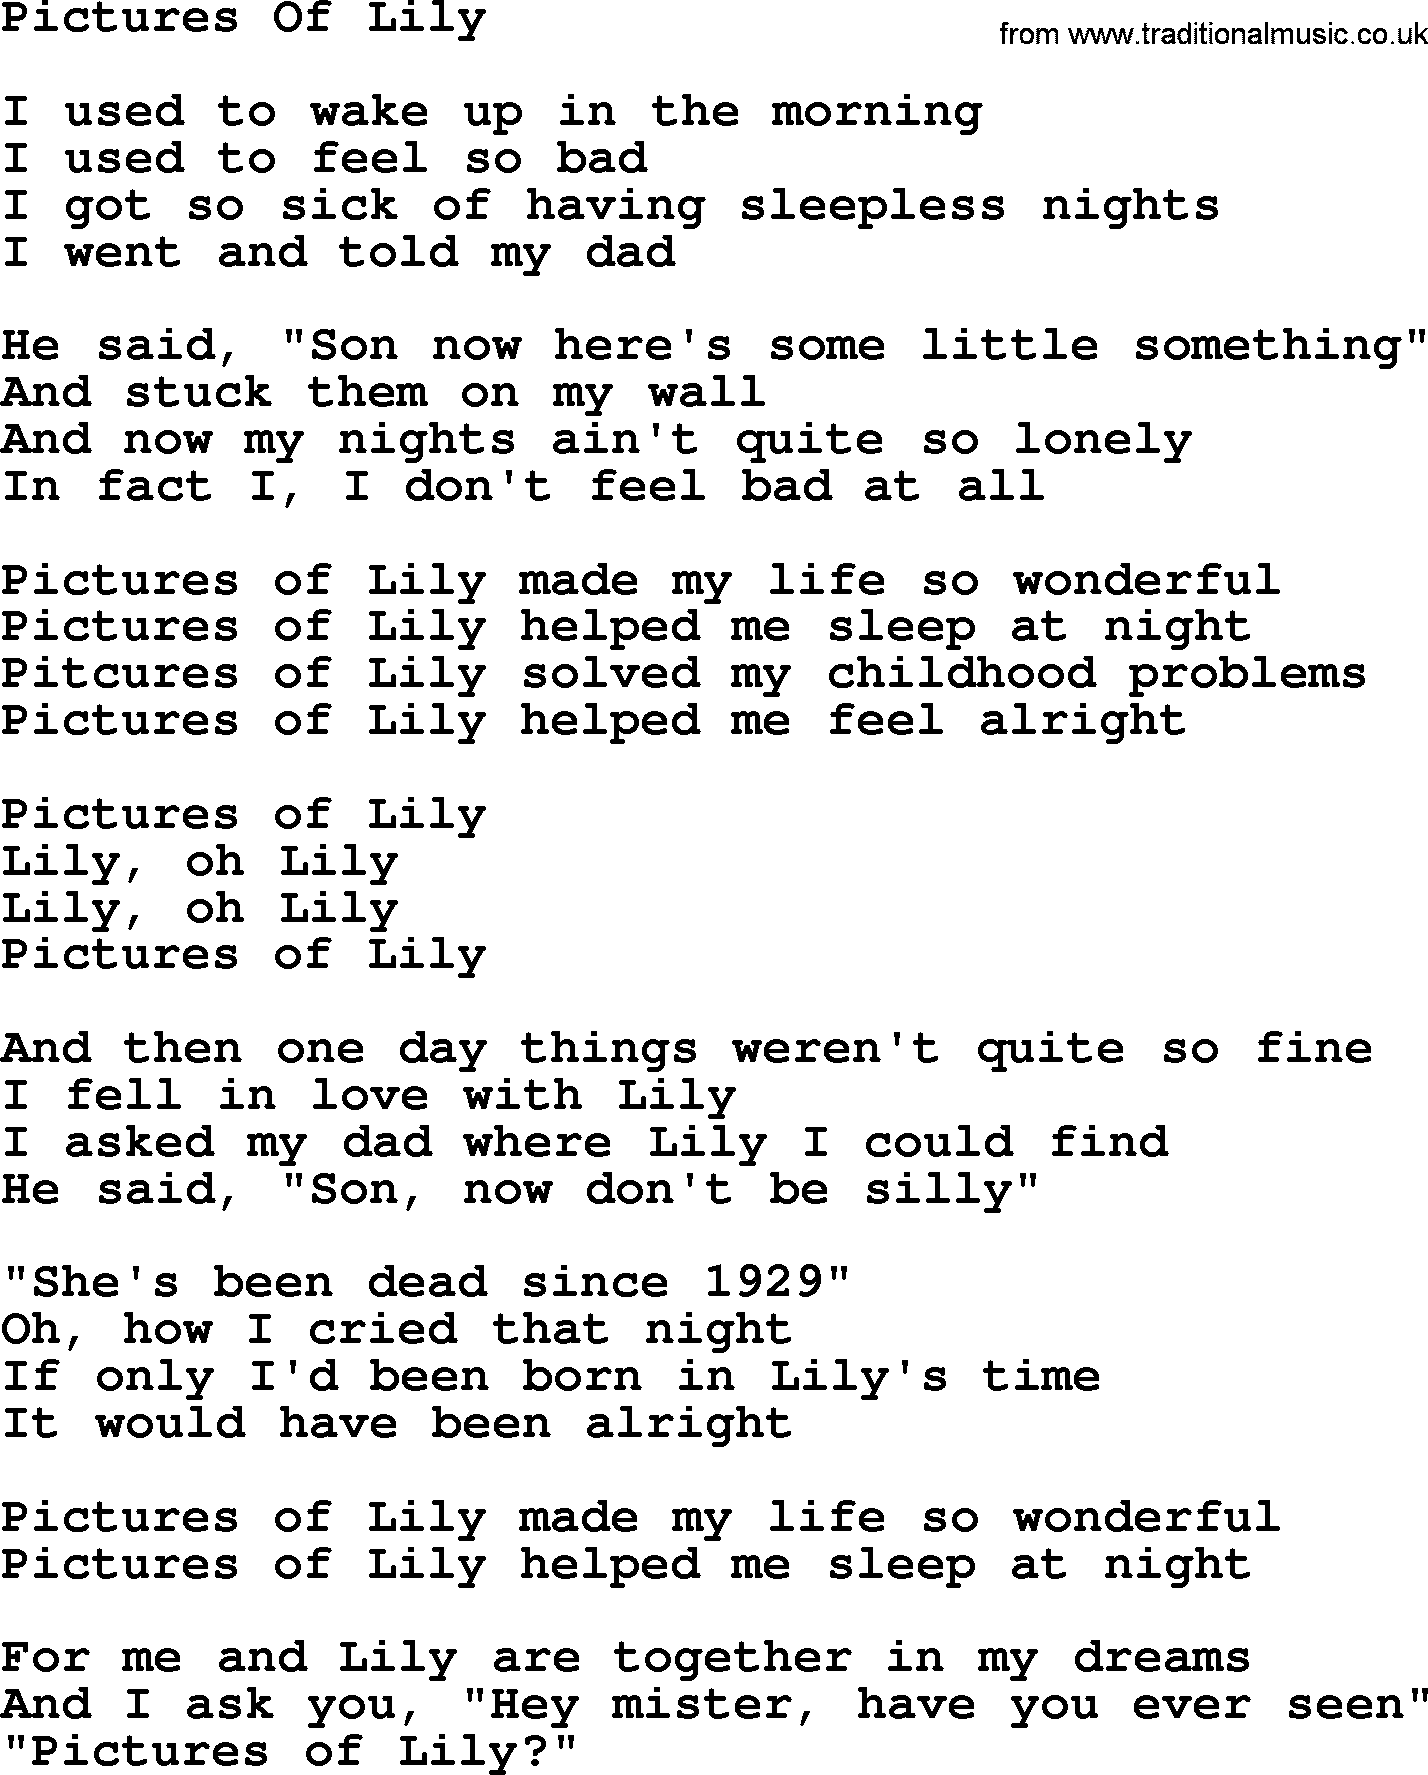 The Byrds song Pictures Of Lily, lyrics